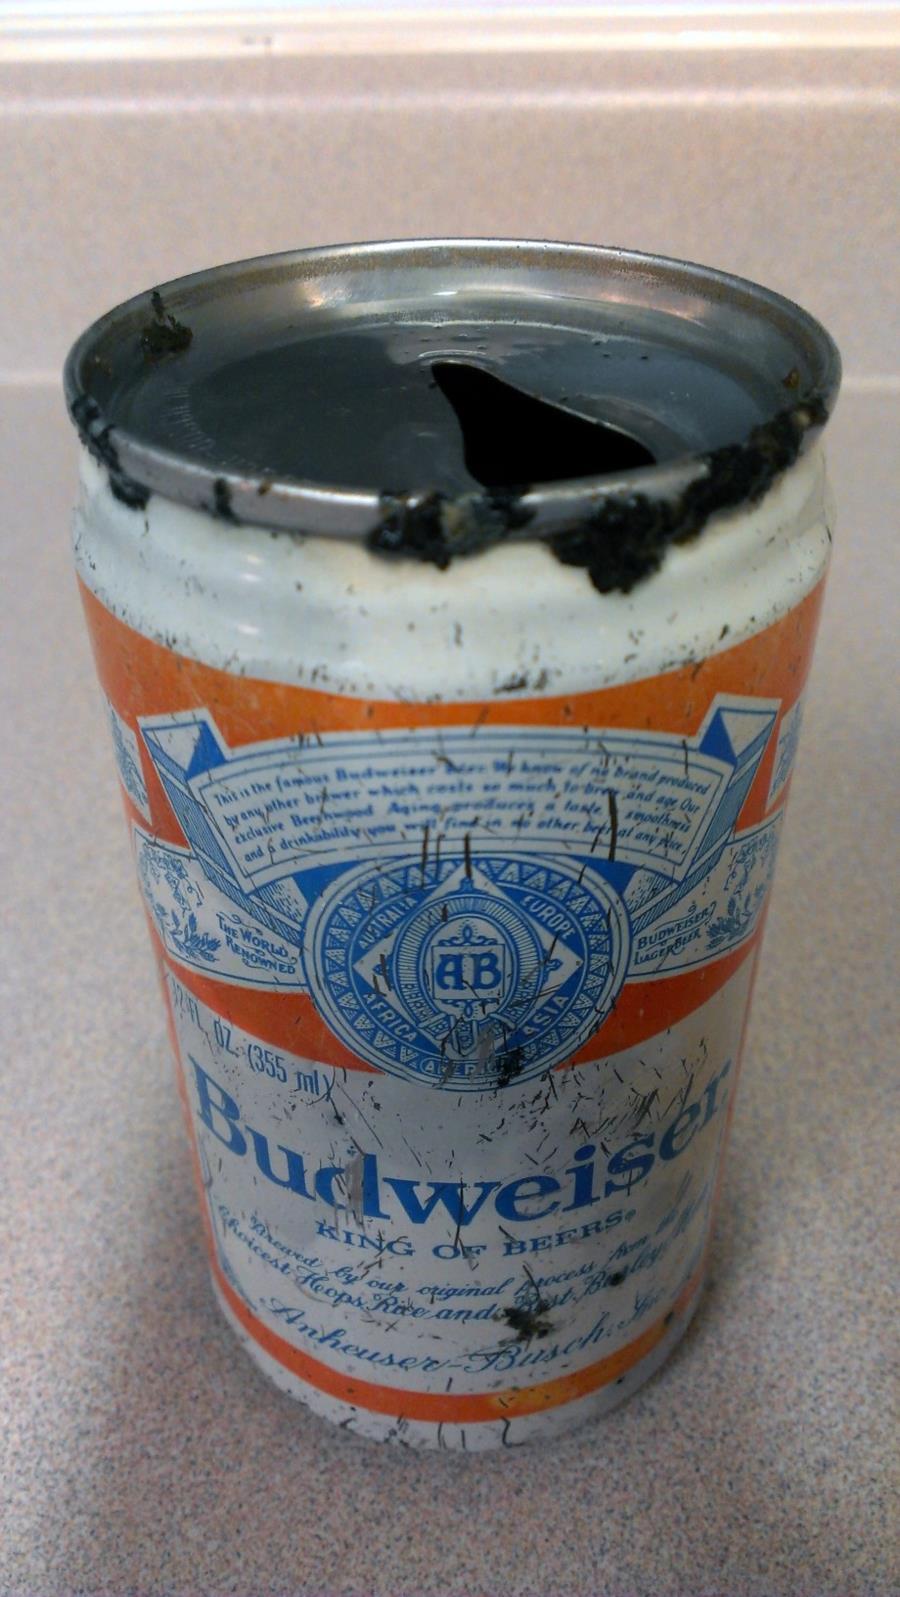 Mansfield Dam Dive Park - Old beer can found near Mansfield Dam in Lake Travis